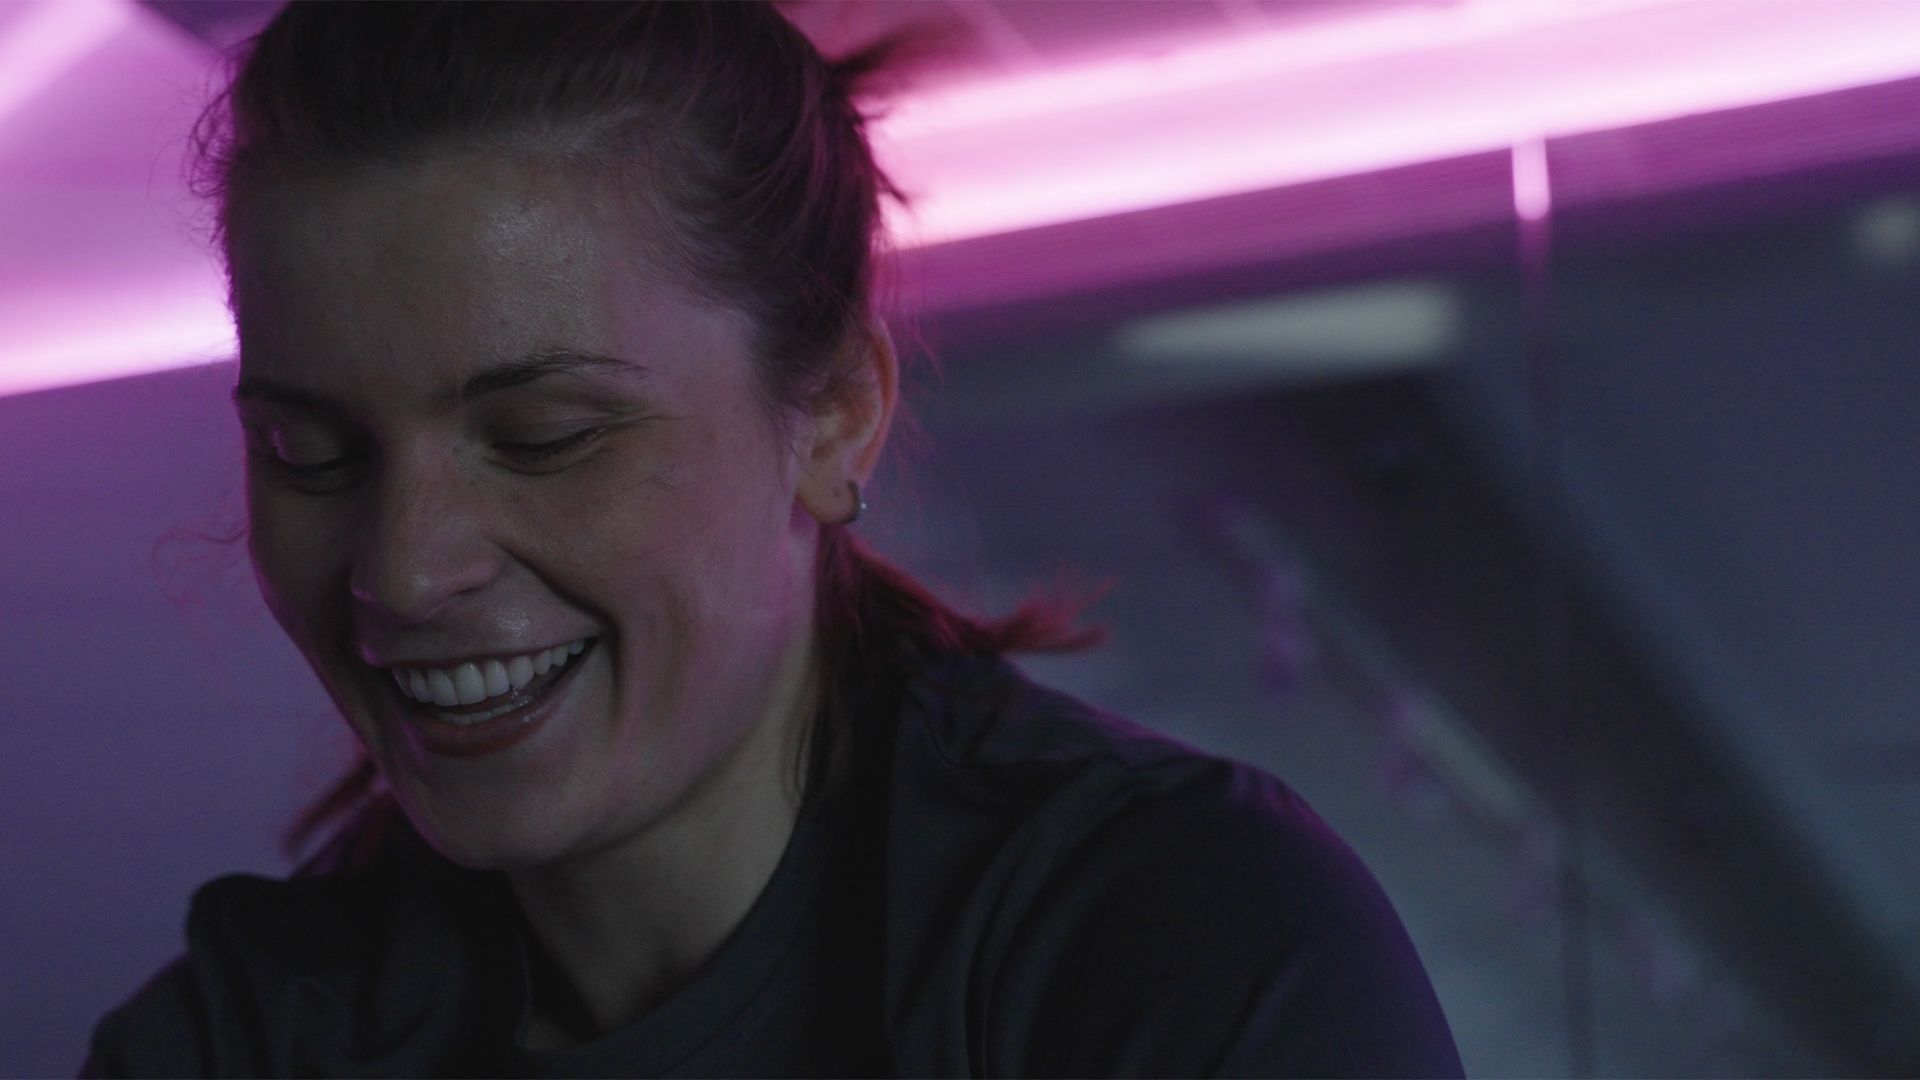 A woman is smiling while sitting on a bicycle in a dark room.